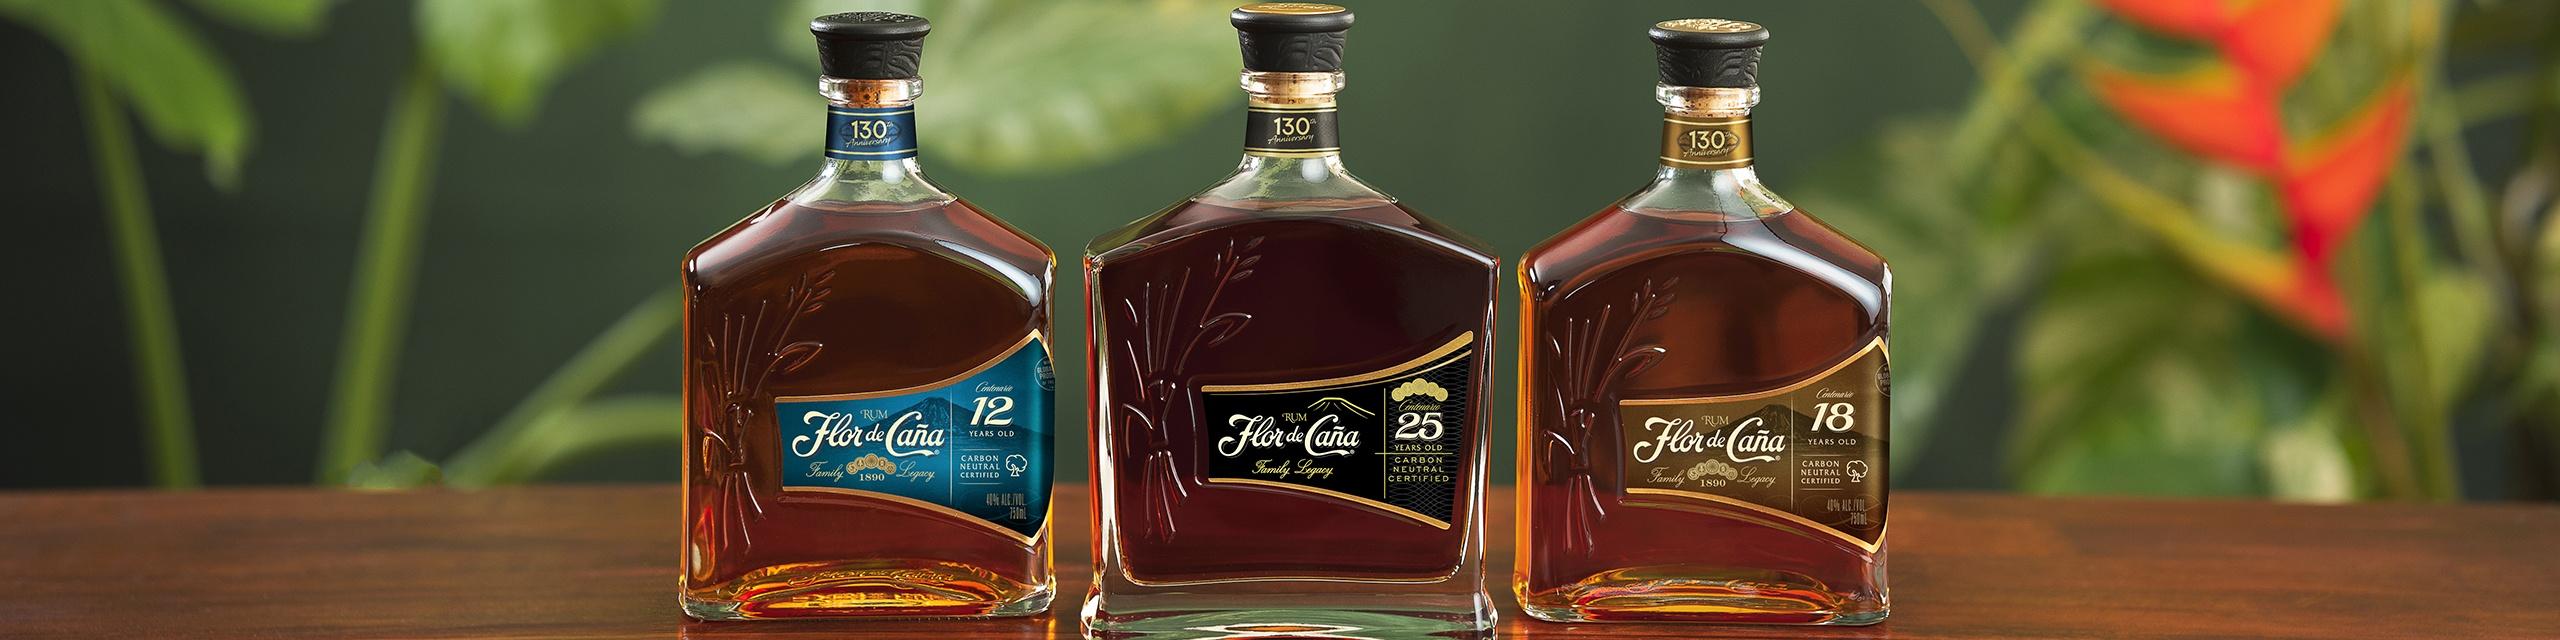 Nicaragua's super premium rum since 1890. Naturally aged and volcano-enriched. Buy Flor de Cana Rum online now from nearby liquor stores via Minibar Delivery. 